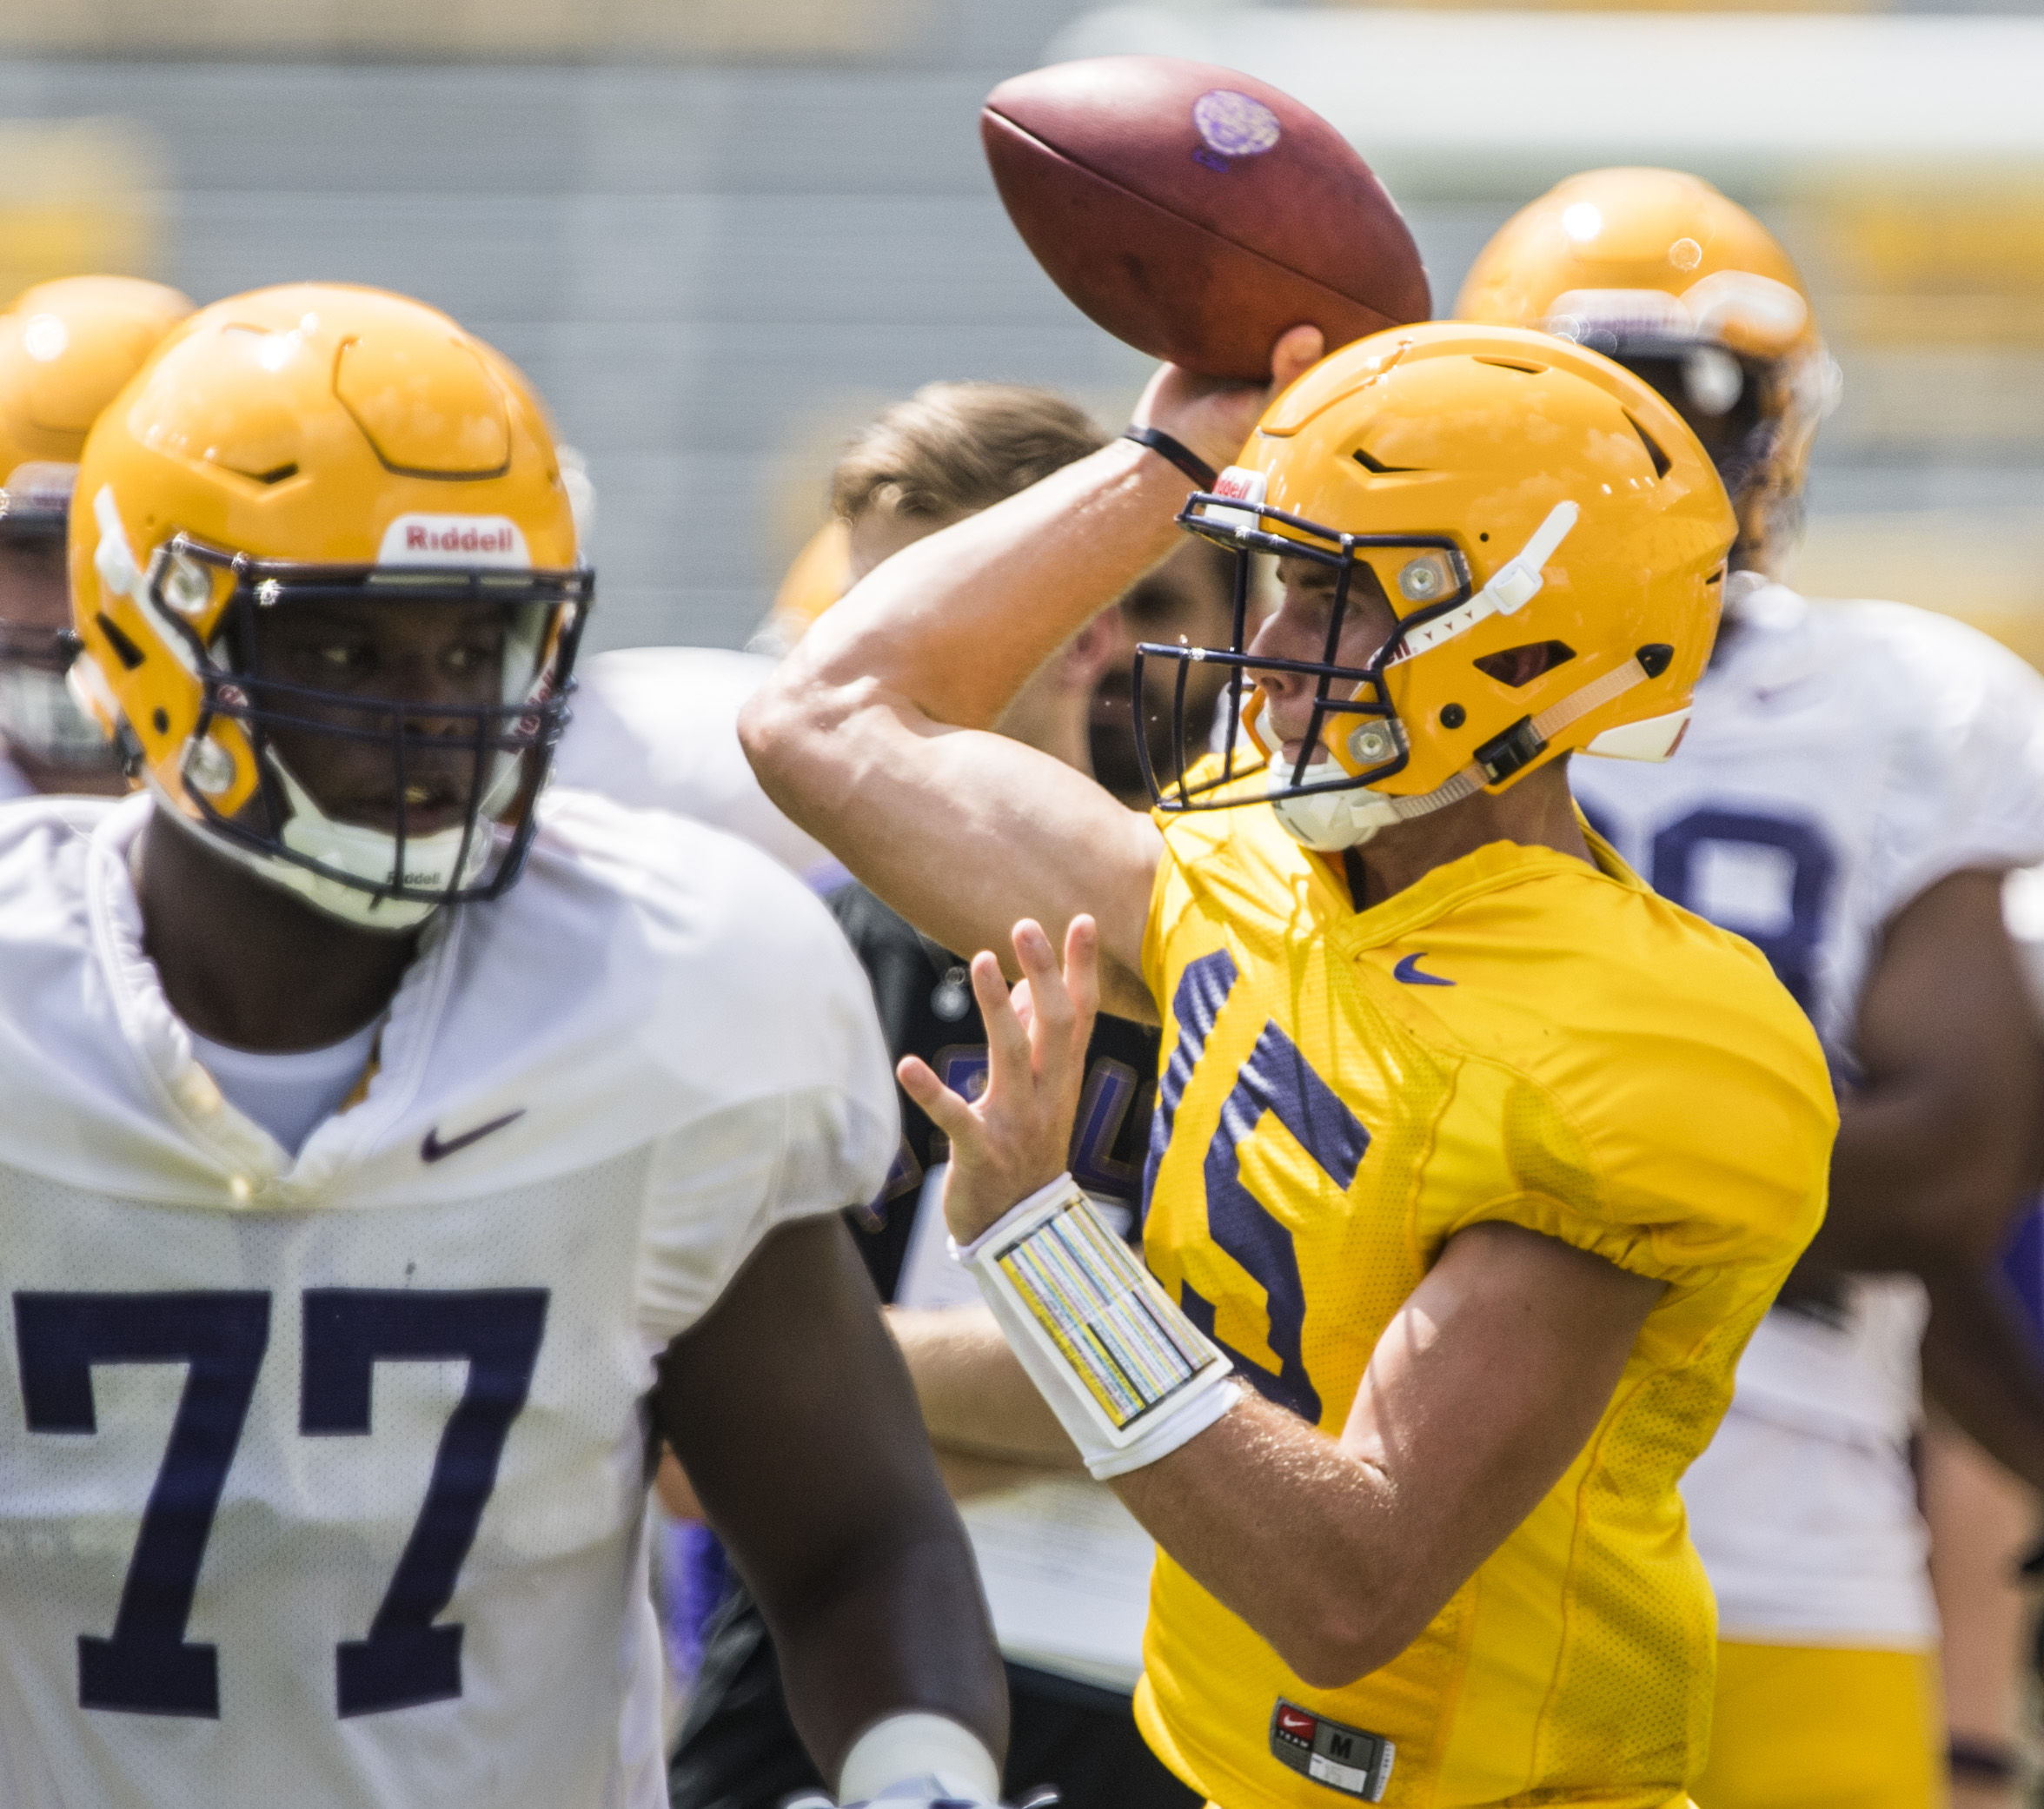 LSU WRAPS UP THIRD WEEK OF PRESEASON WITH SITUTIONAL SCRIMMAGE